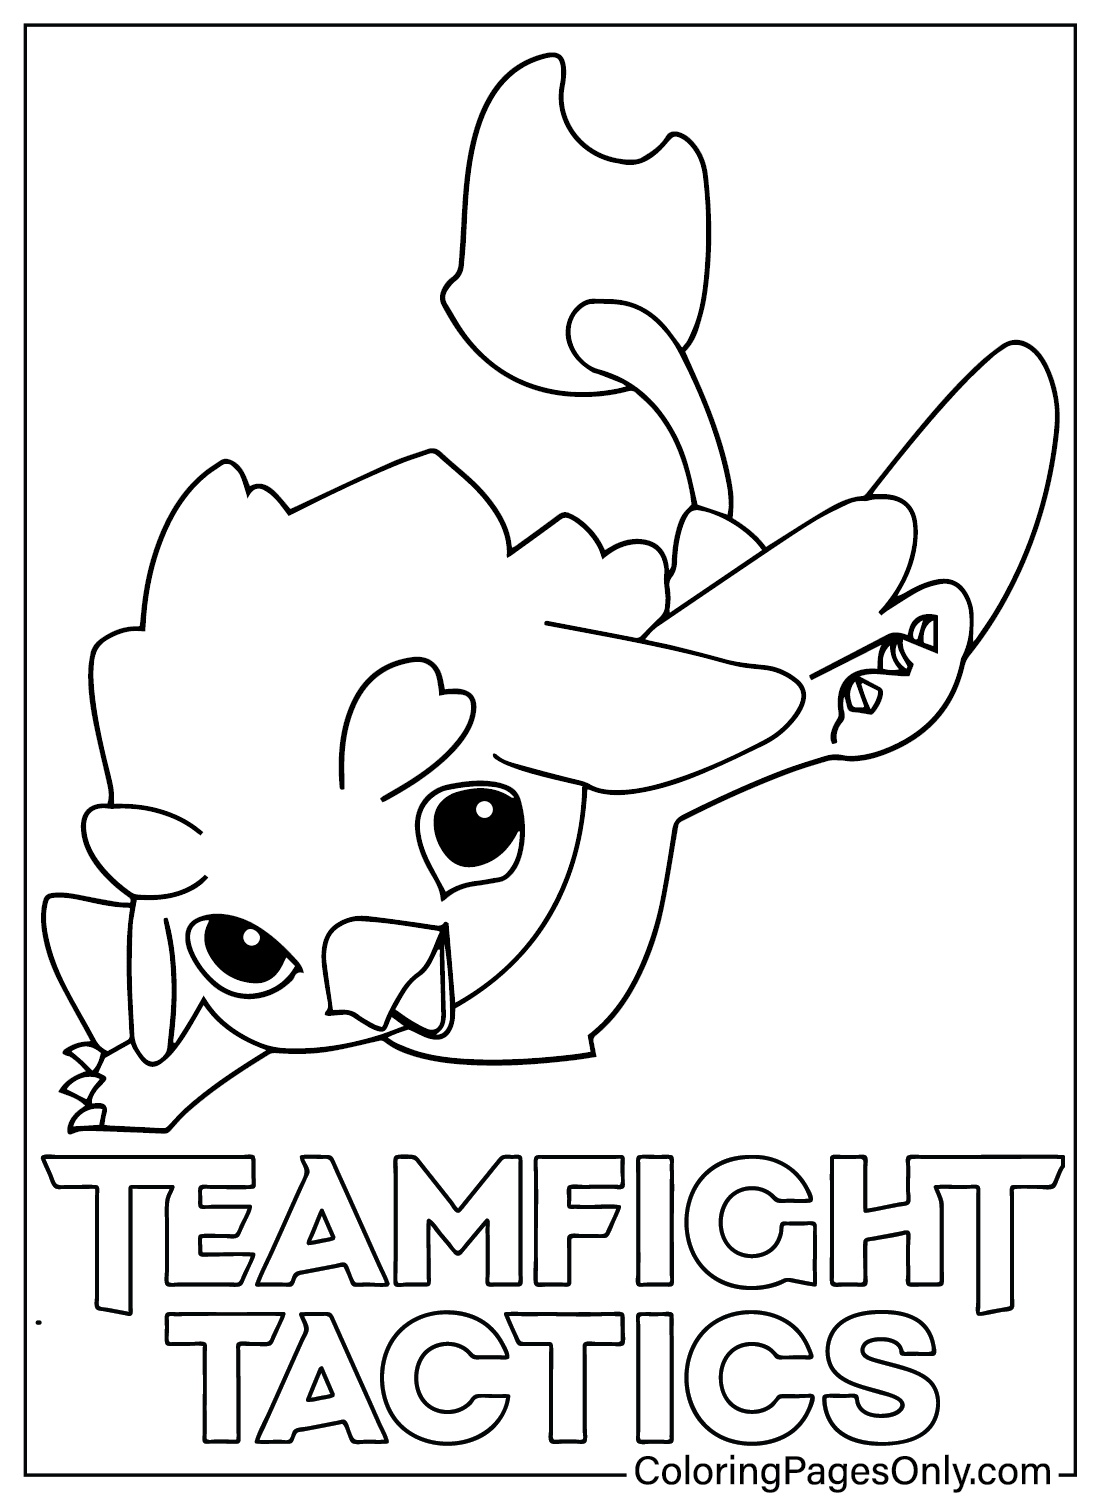 Beginners Guide to Teamfight Tactics Coloring Page from Teamfight Tactics